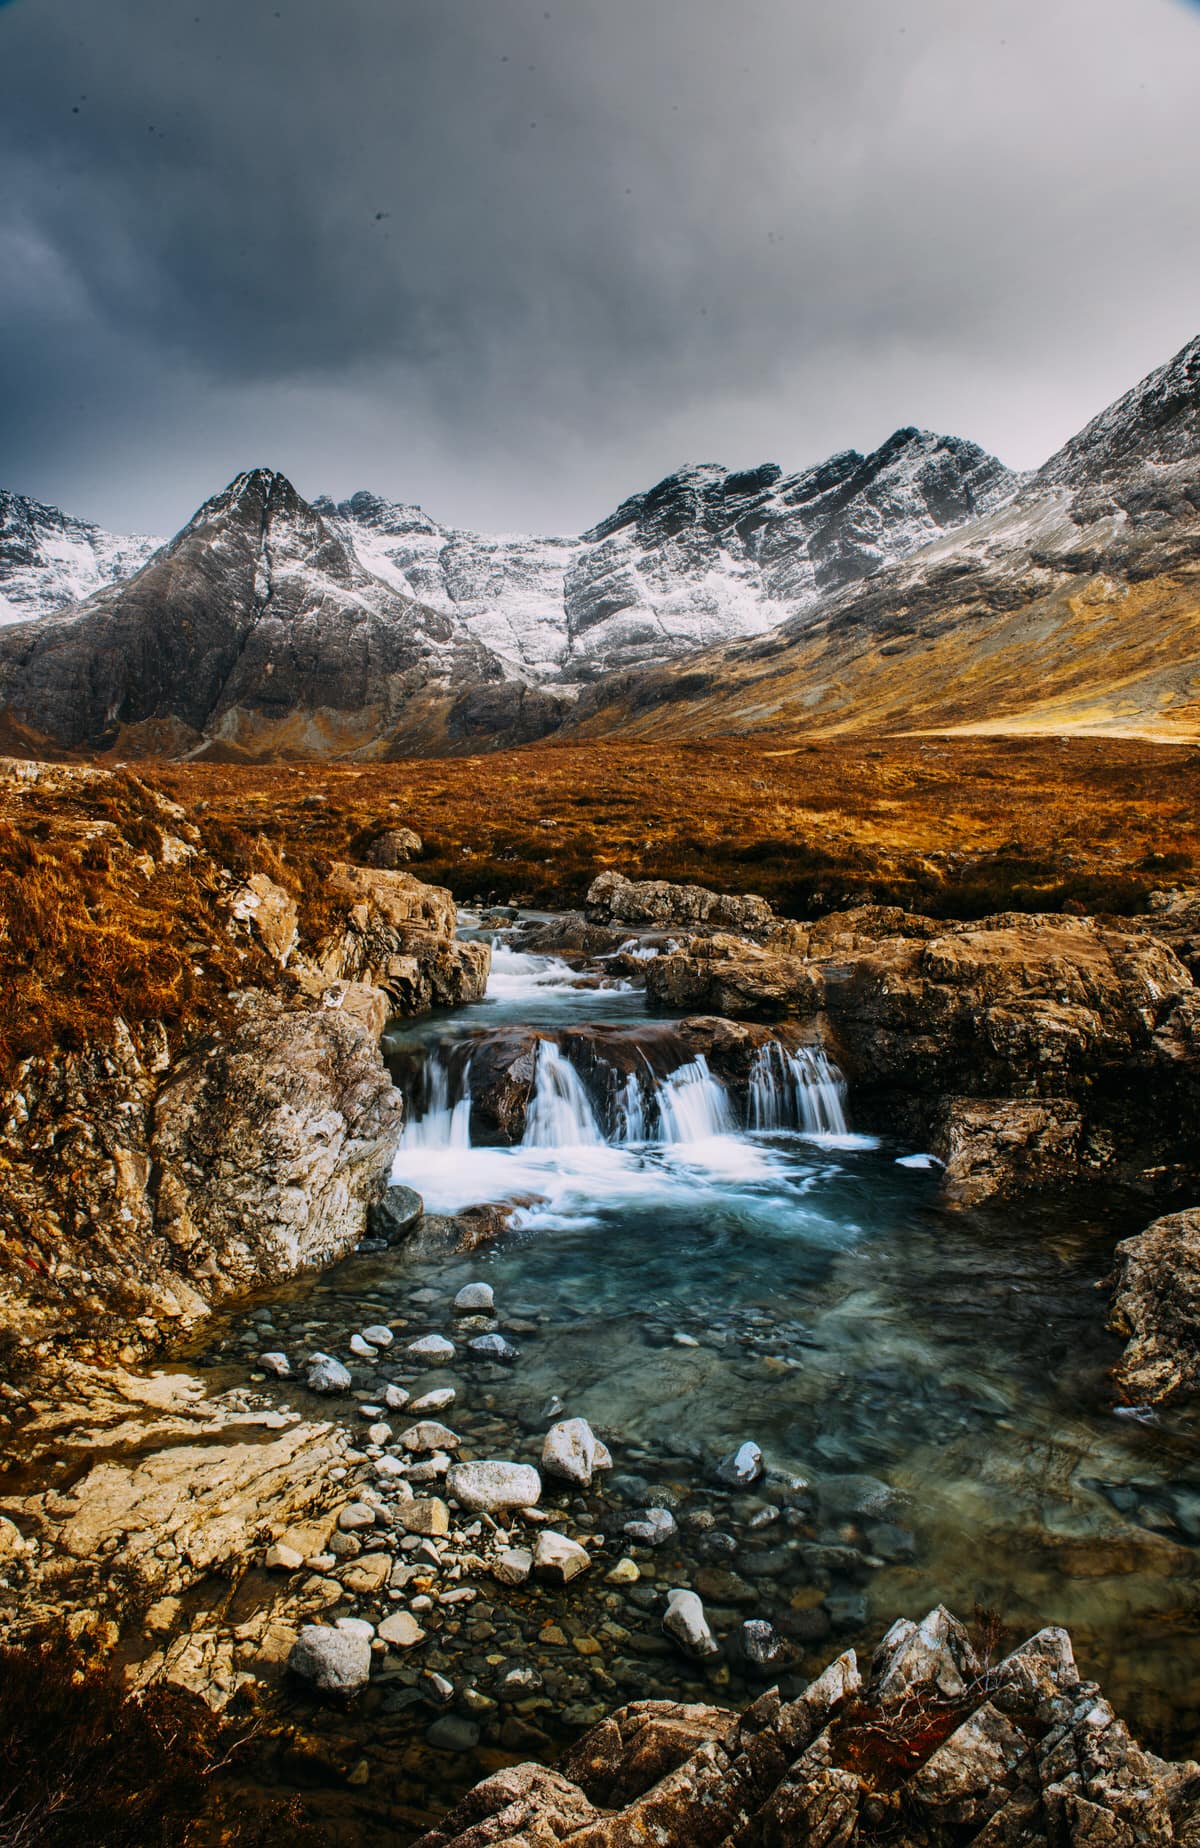 Where to elope on the Isle of Skye - the Fairy Pools